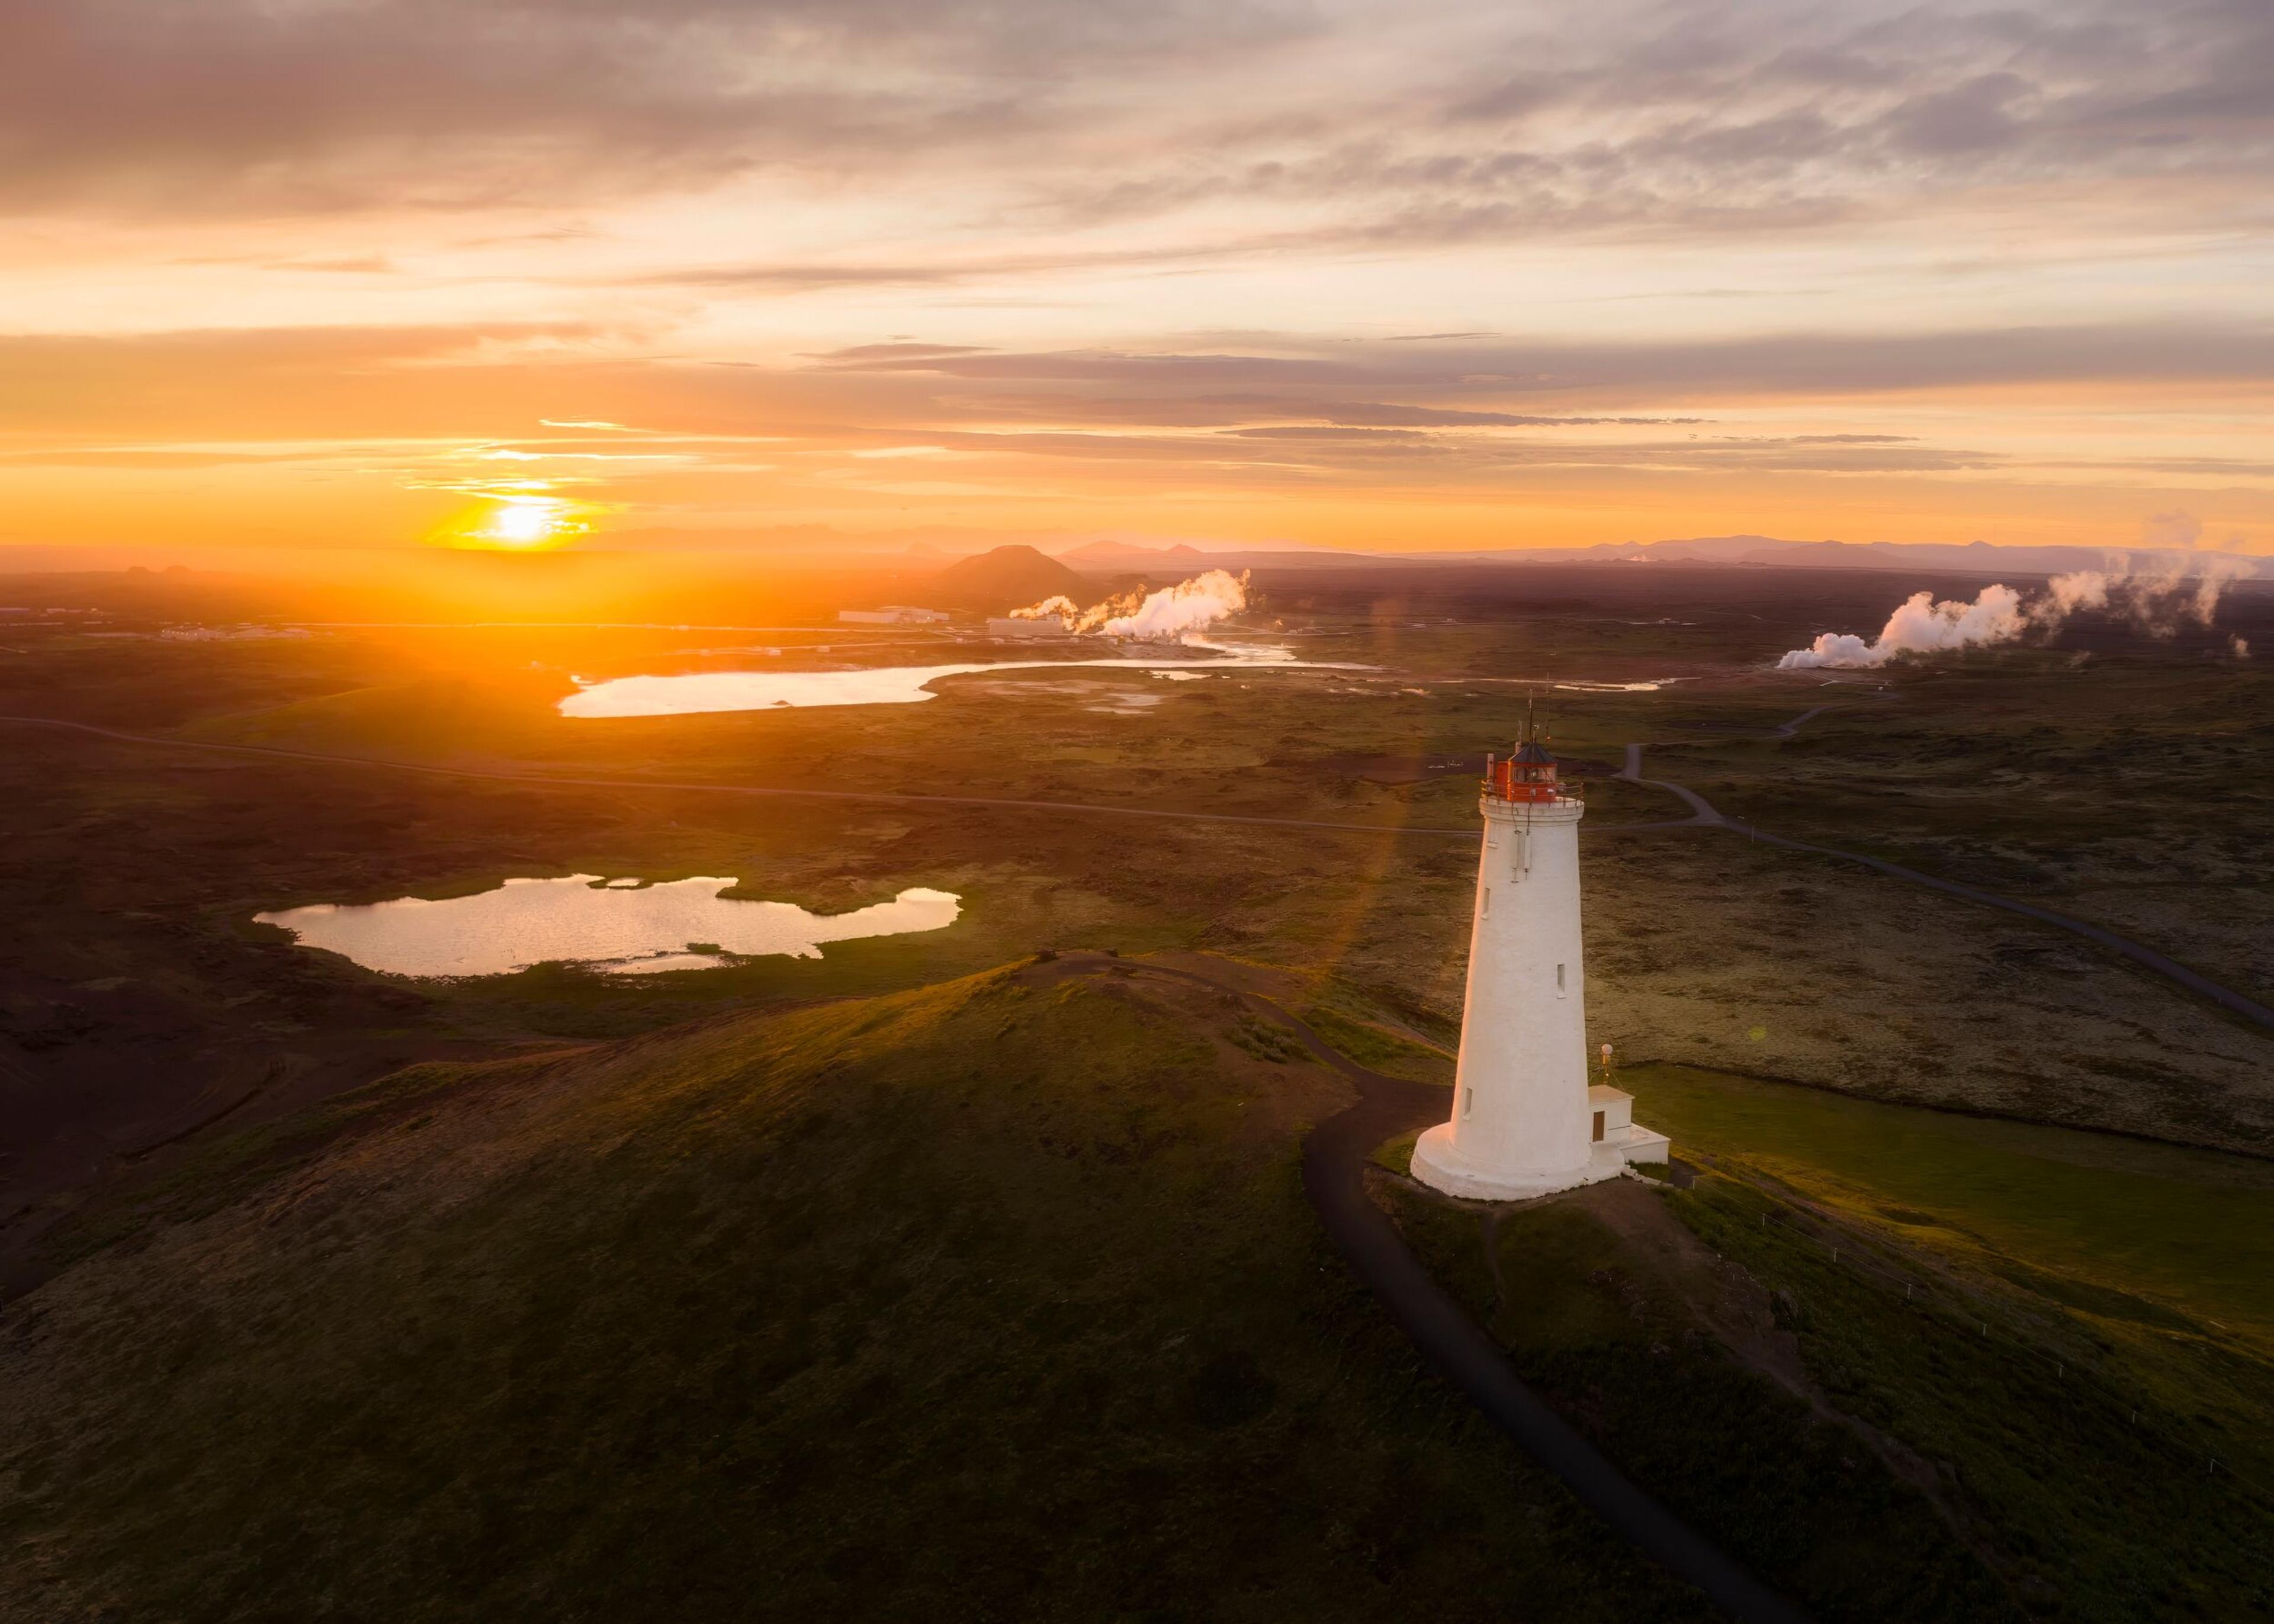 A white lighthouse sitting on a hilltop with the sunset painting the landscape gold